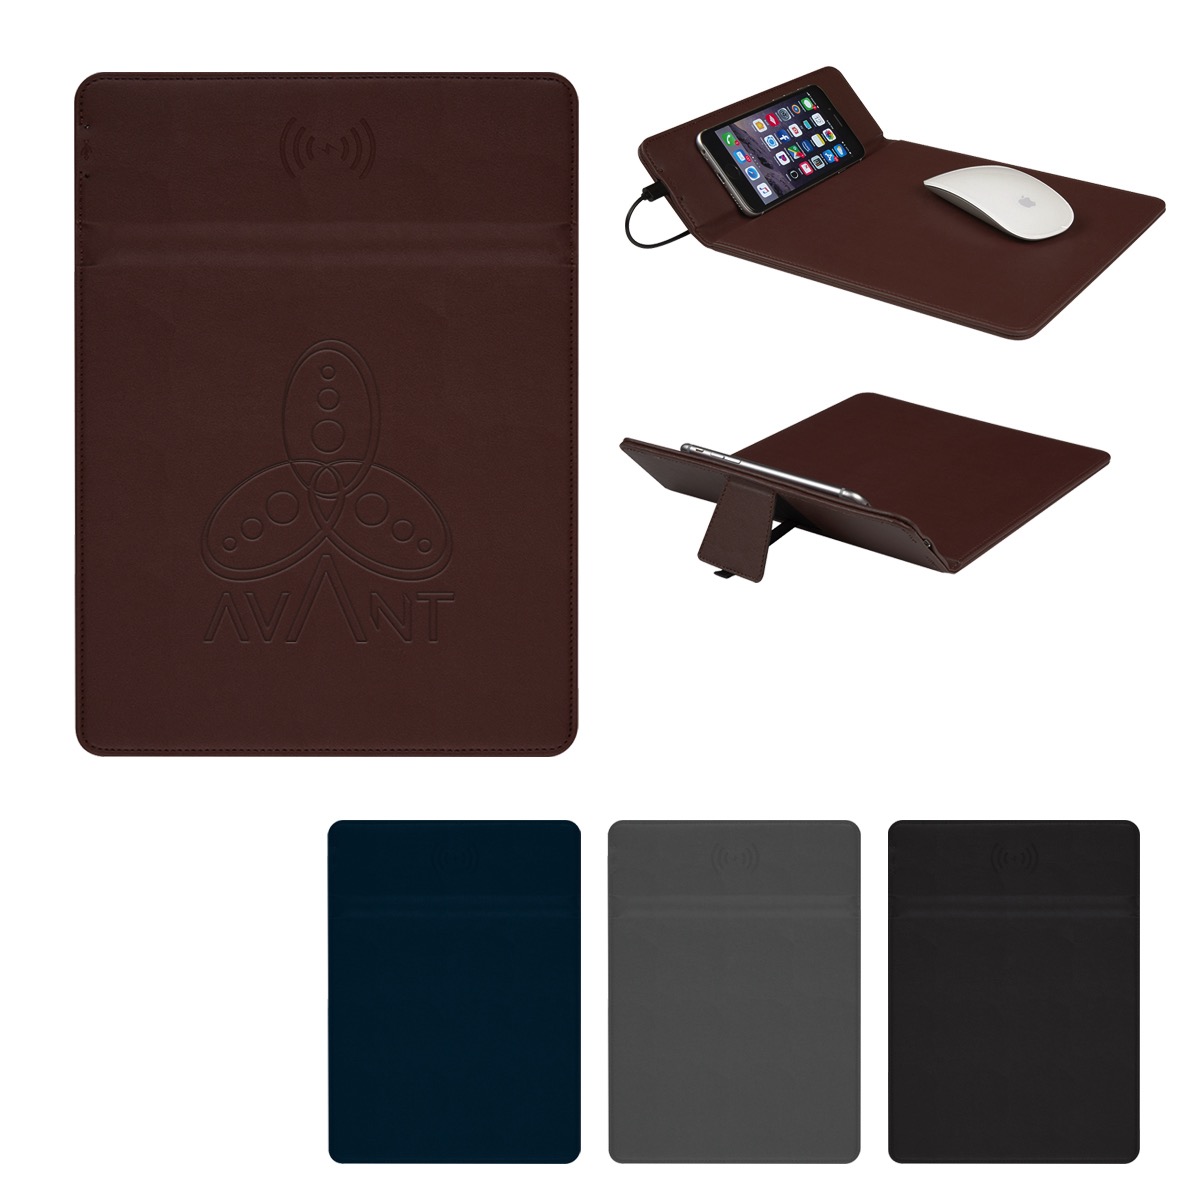 ireless Charching Mouse Pad